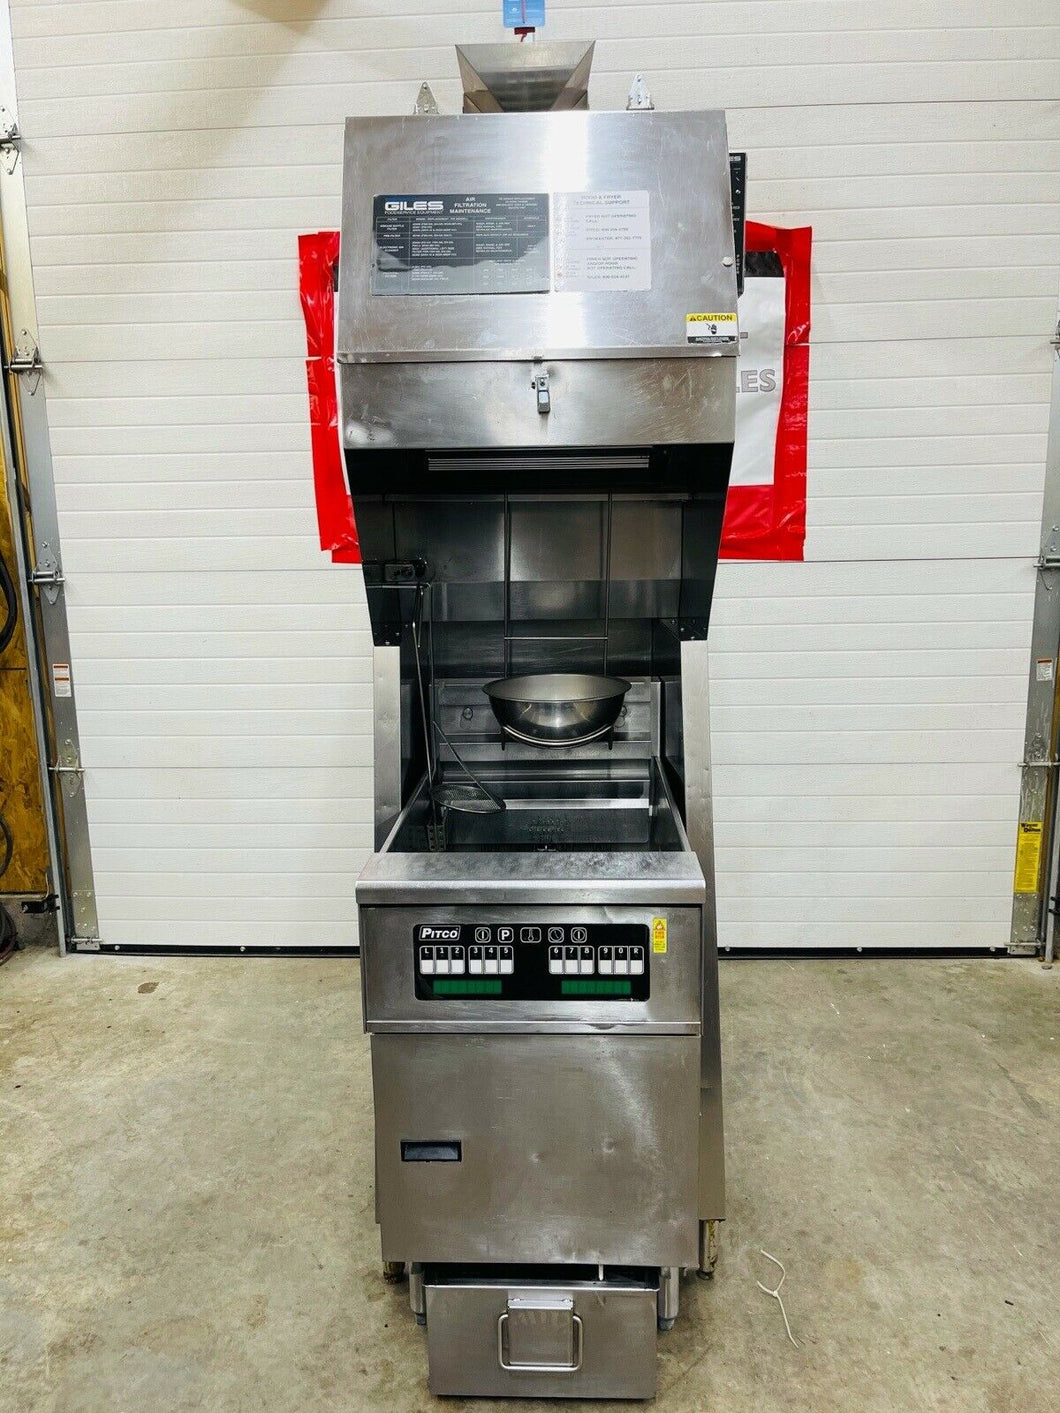 Pitco PH-SEF184-S & Giles FSH-2-PH COMBO FRYER w/ OIL FILTRATION TESTED WORKING